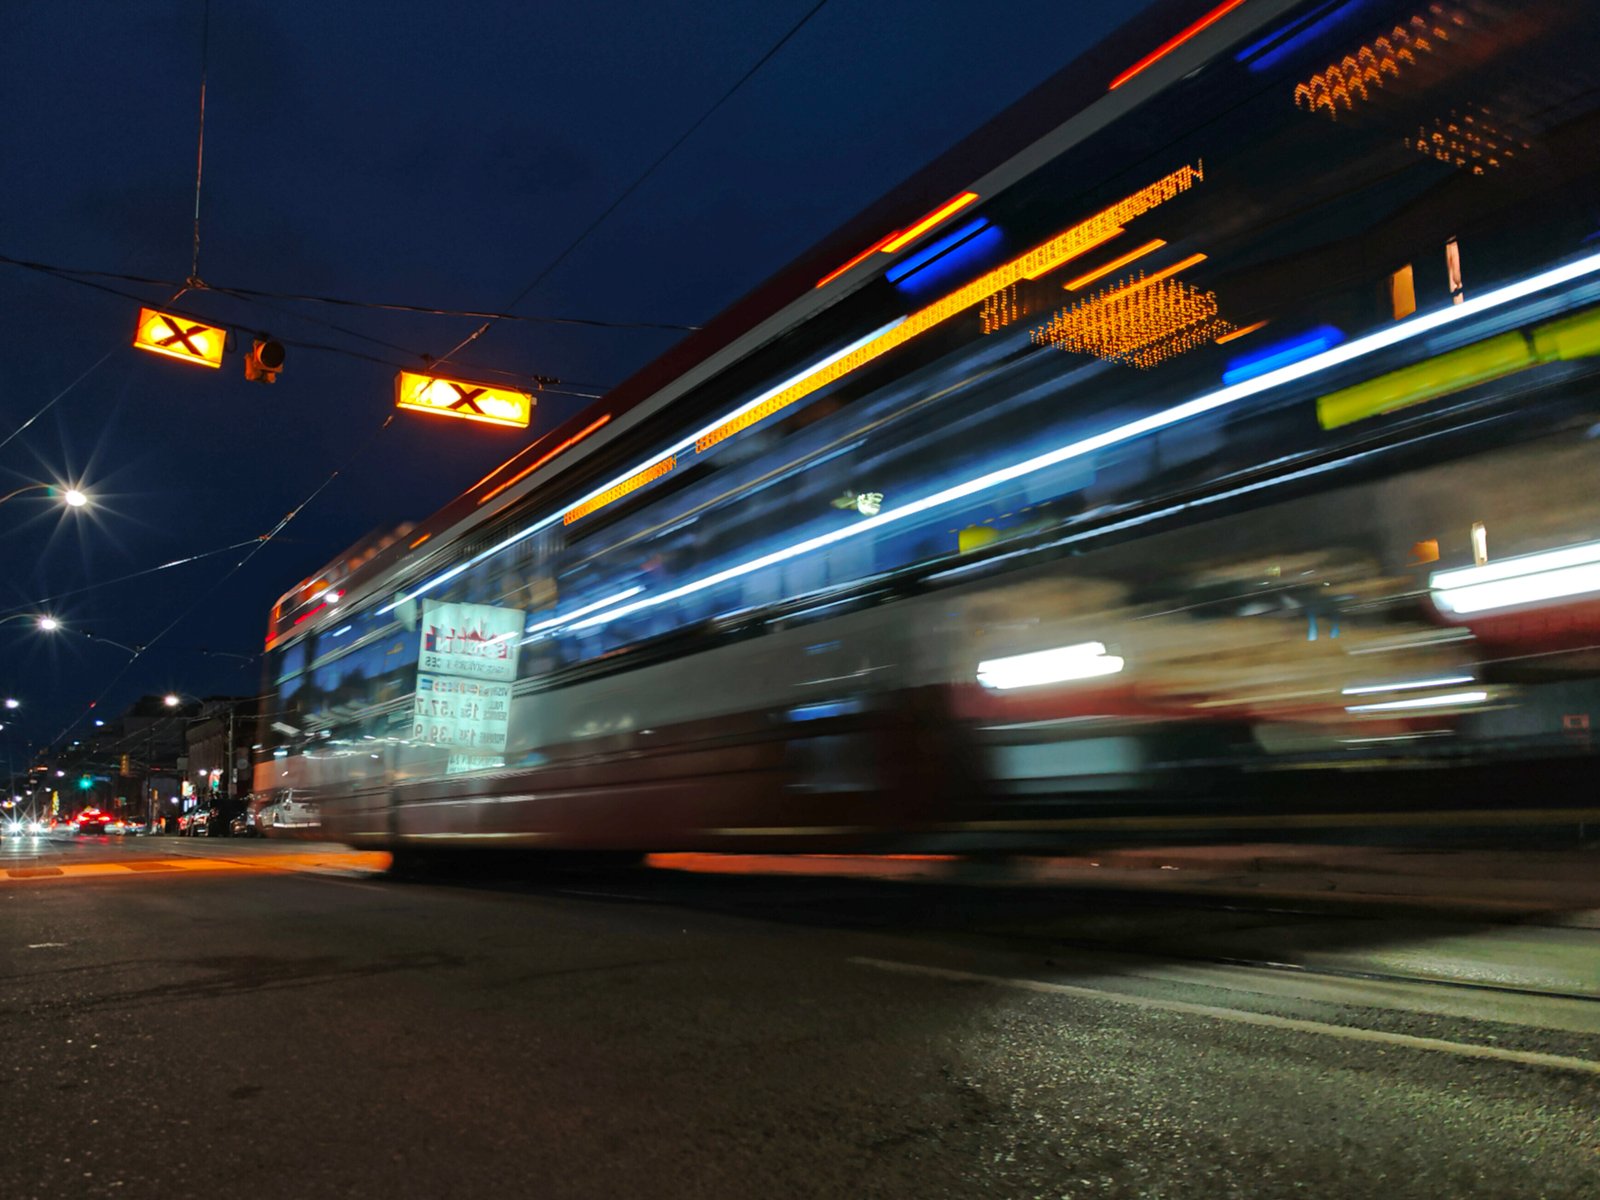 A blurred image of a streetcar in motion at night, captured from a low angle with vivid streaks of light and illuminated traffic signals overhead.